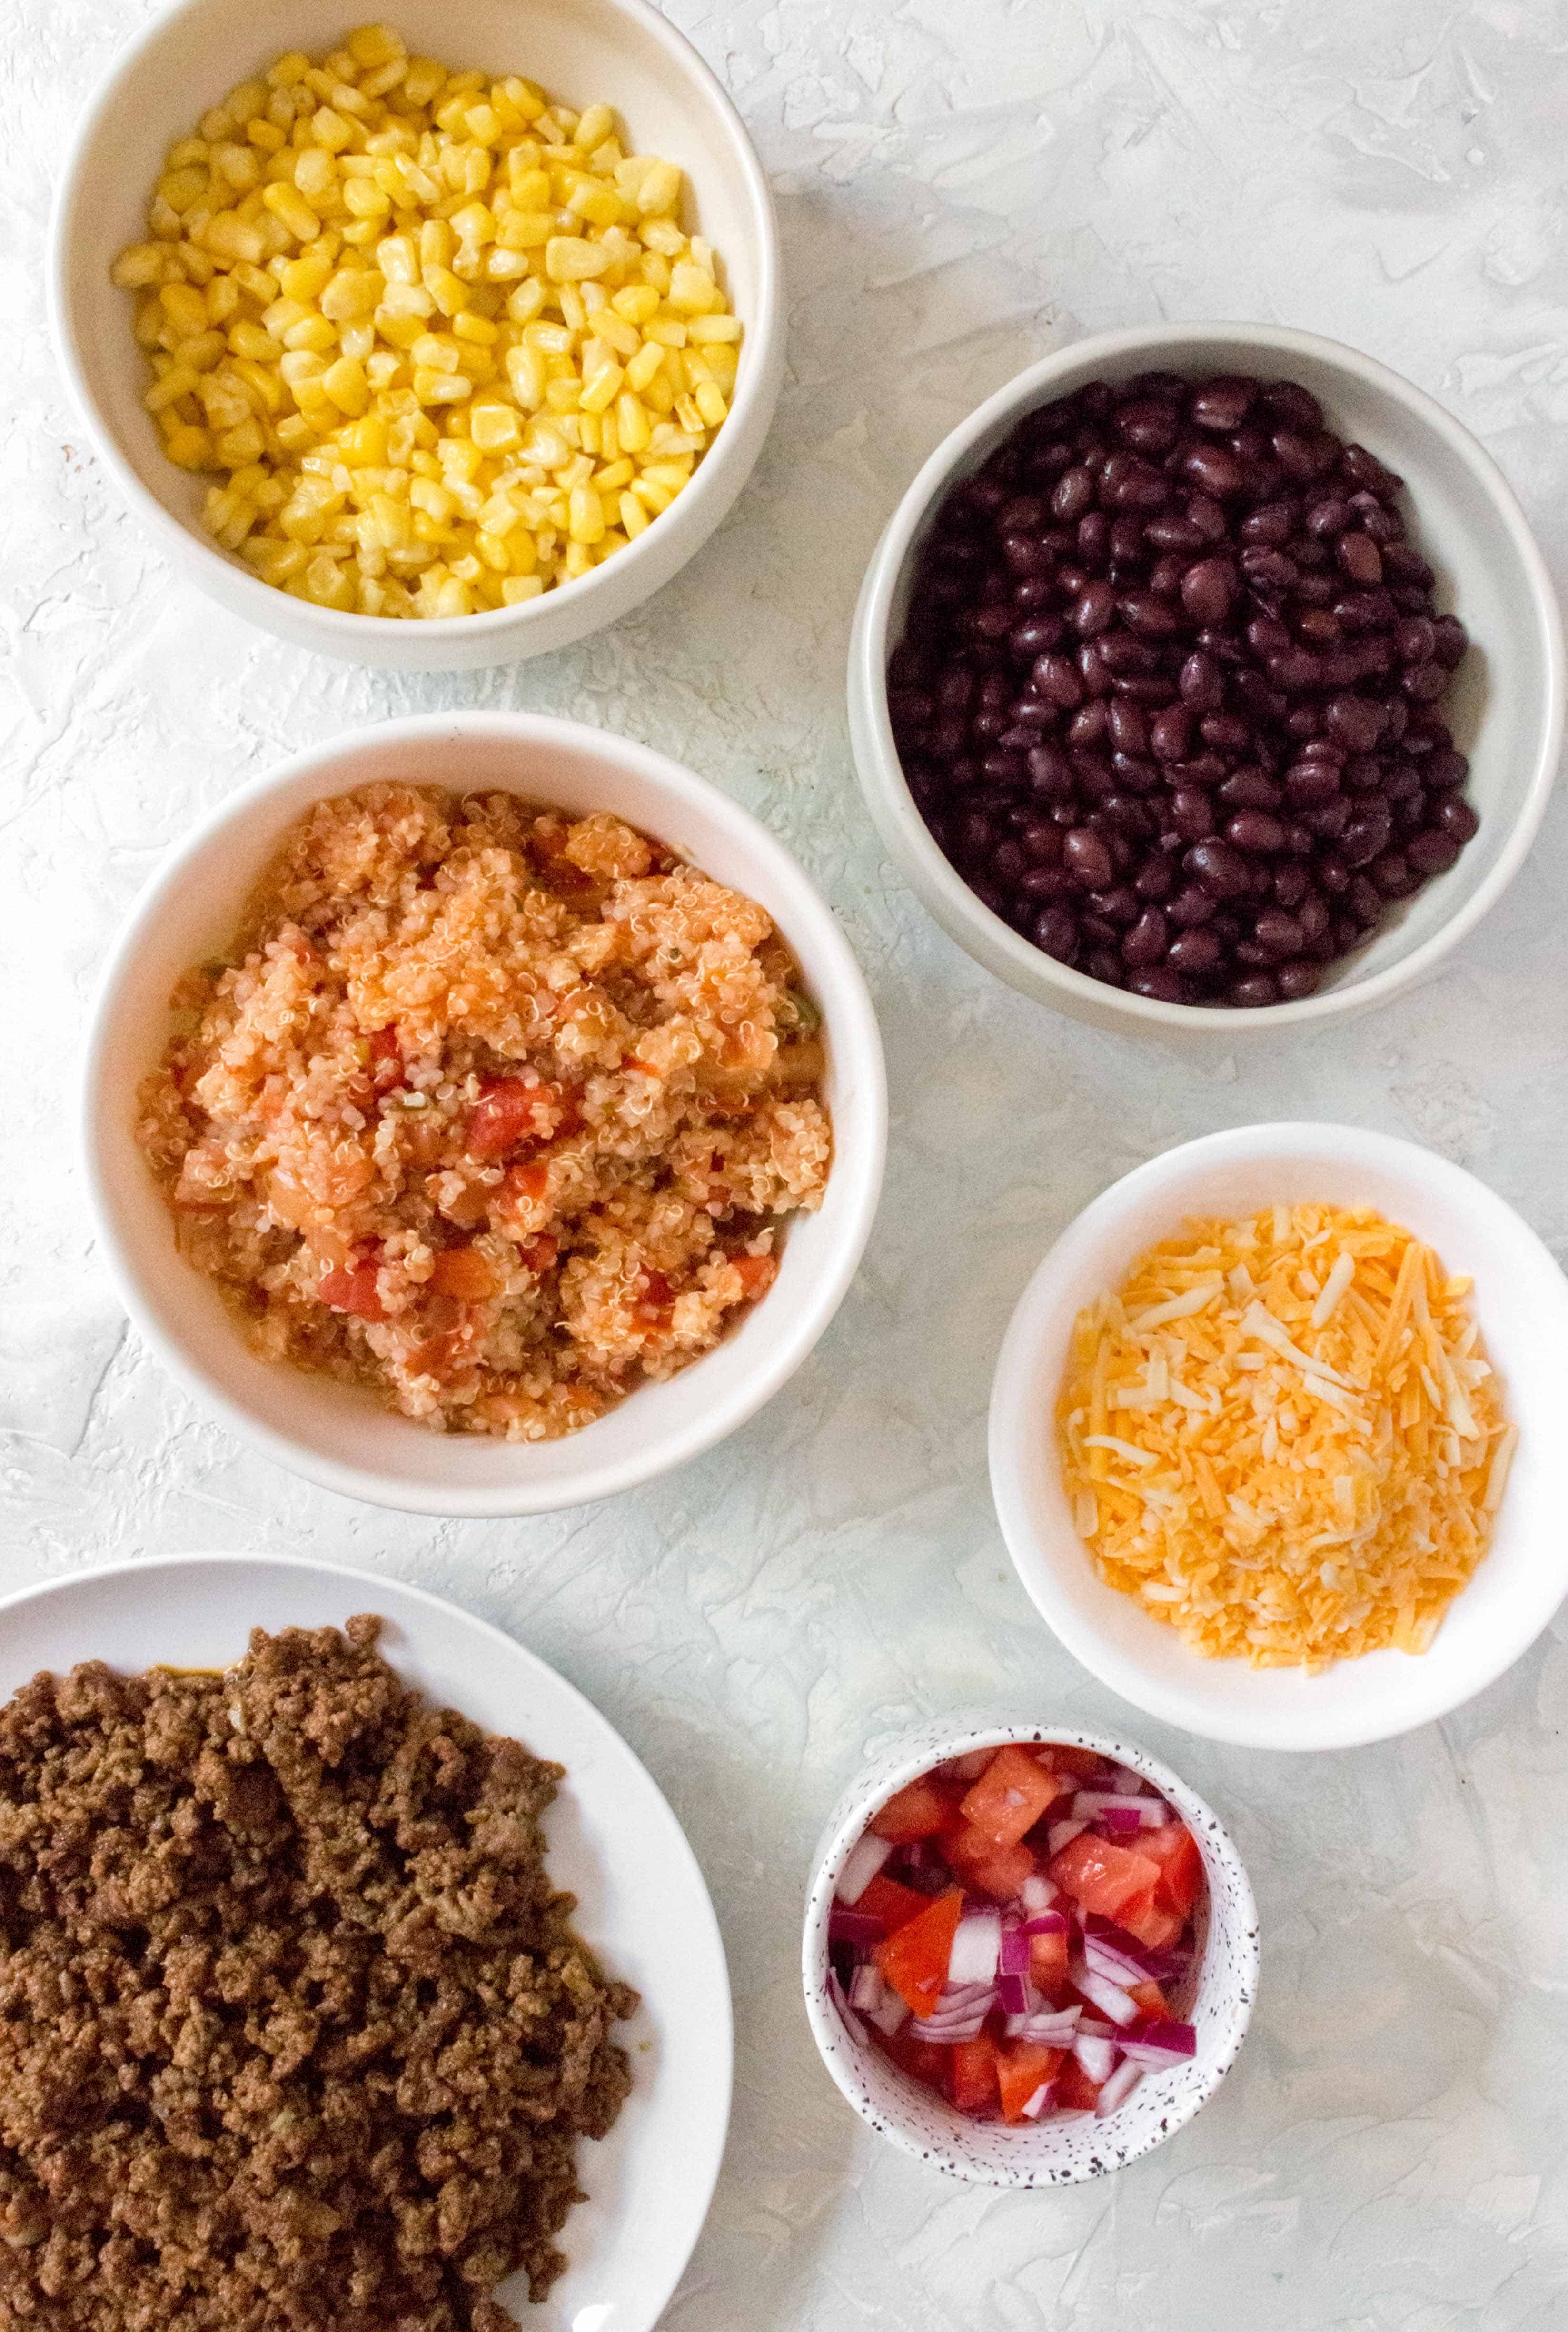 What You'll Need To Make This Taco Meal Prep Bowl